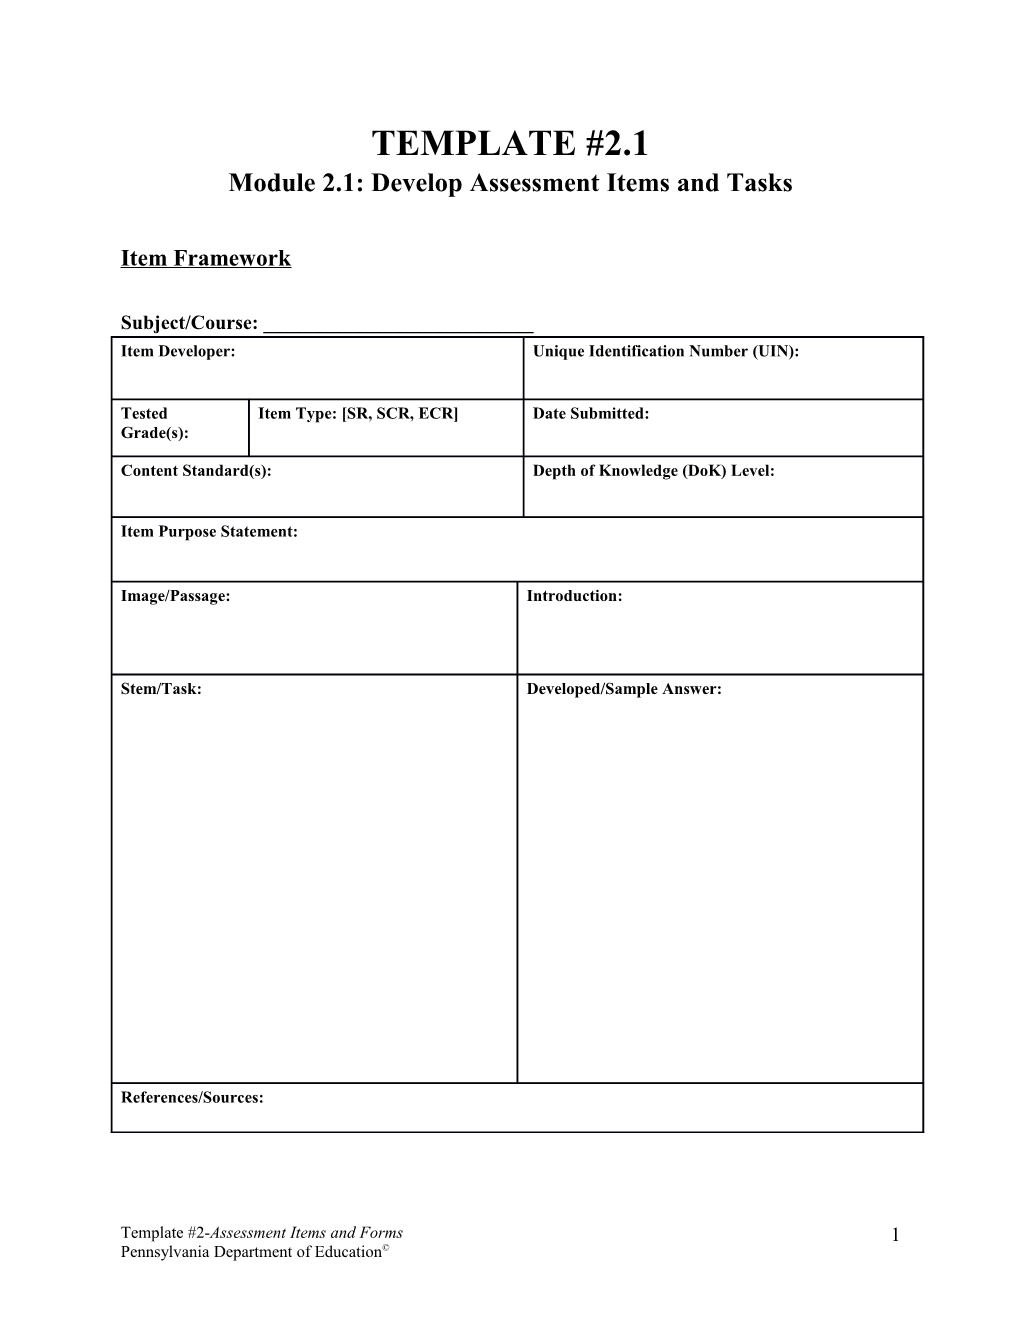 Module 2.1: Develop Assessment Items and Tasks